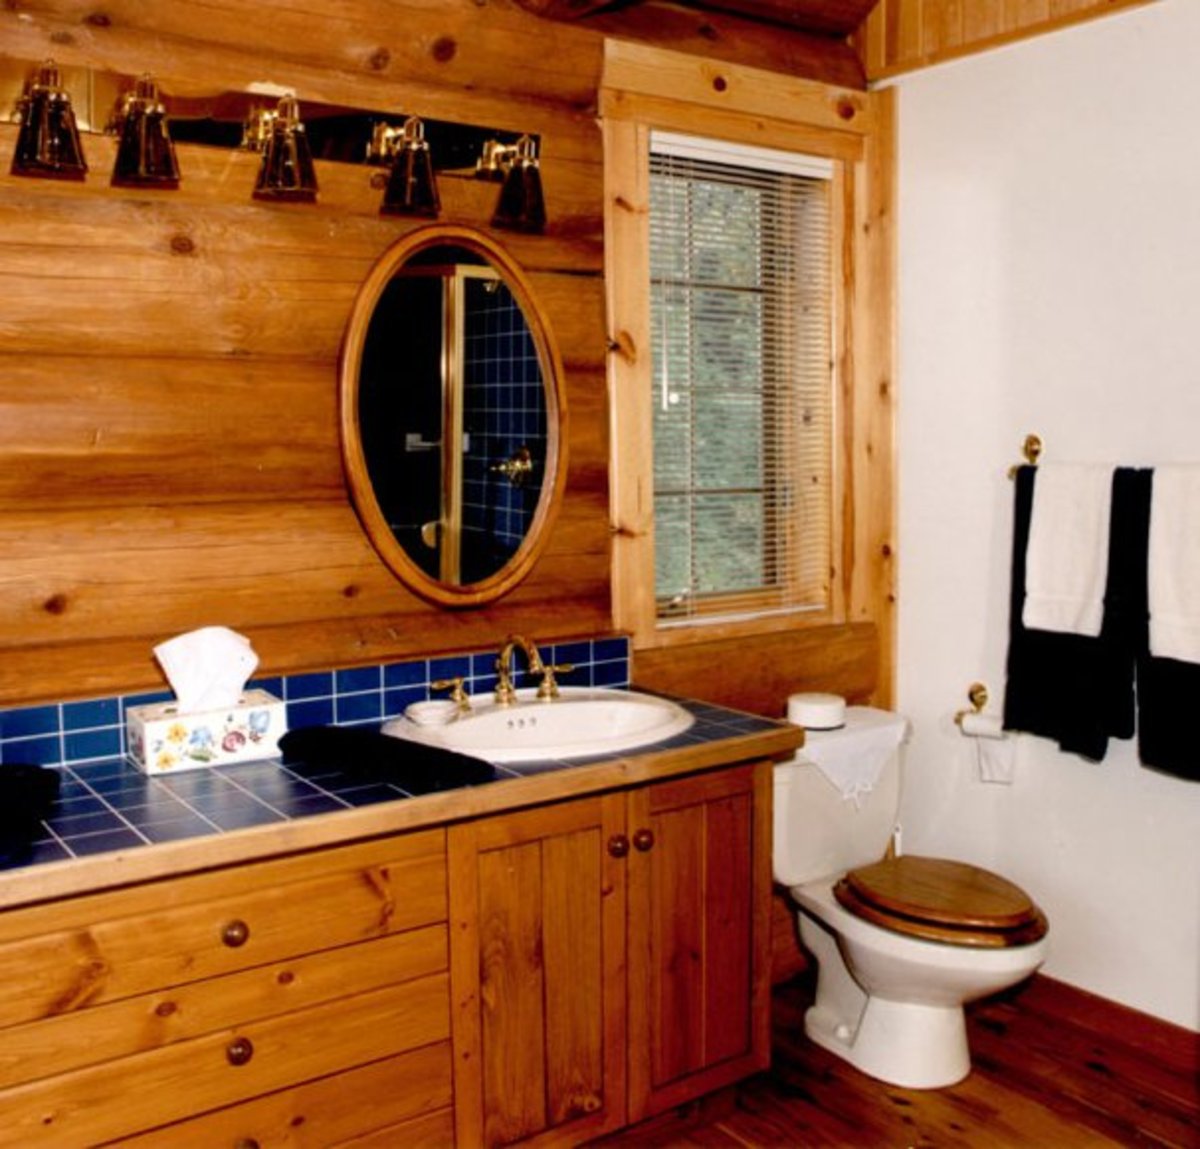 Is there wood in your bathroom?